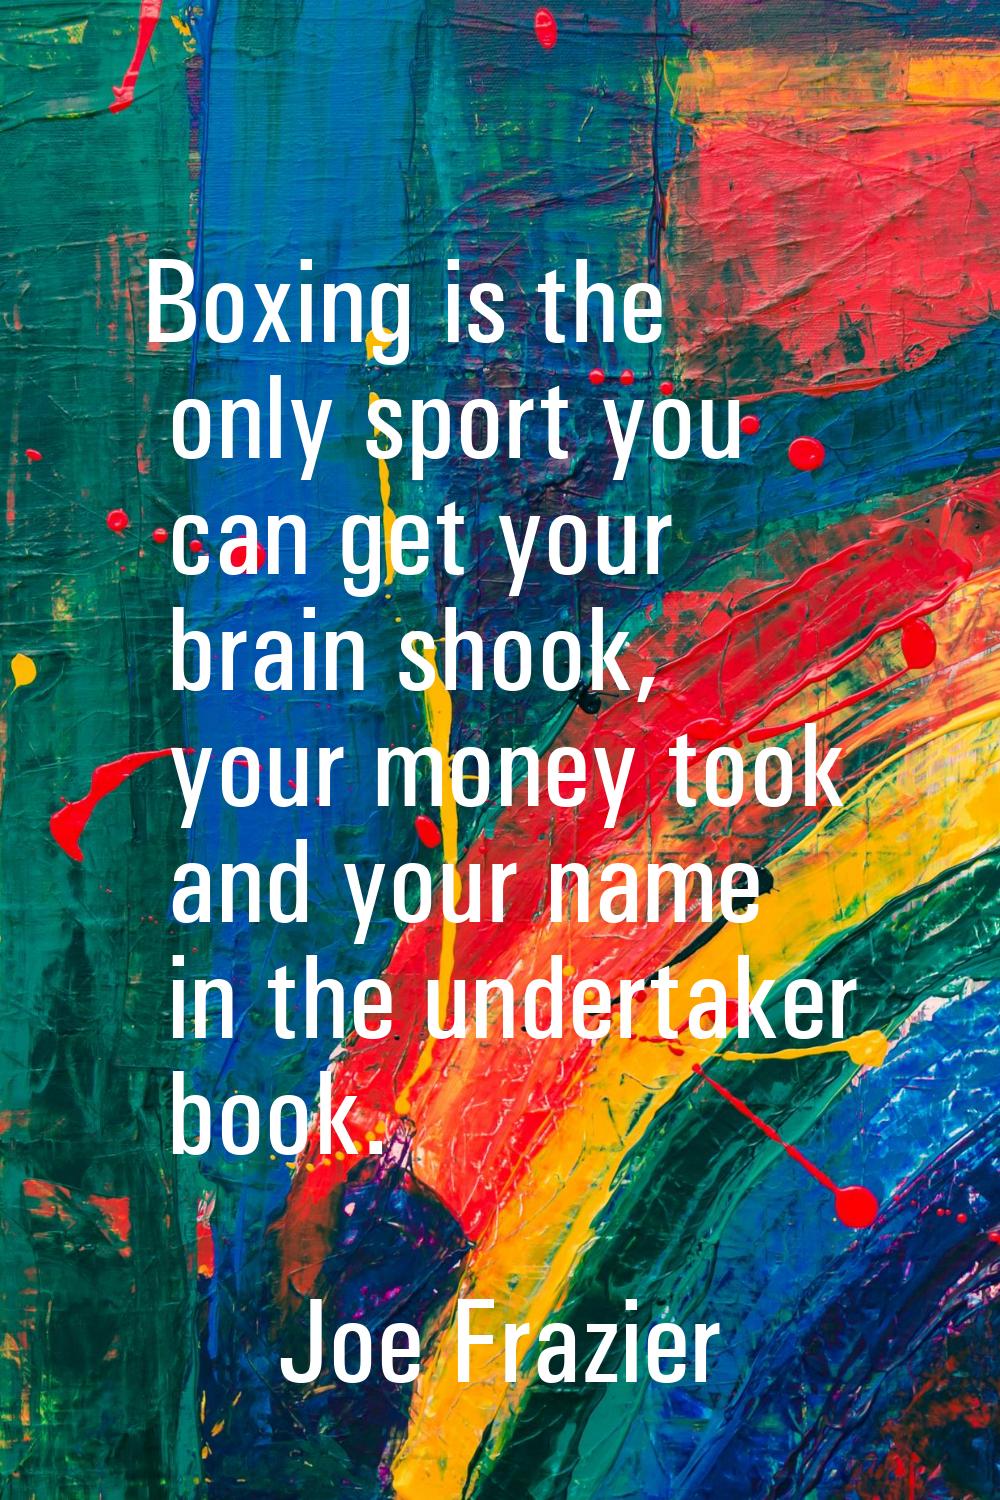 Boxing is the only sport you can get your brain shook, your money took and your name in the underta